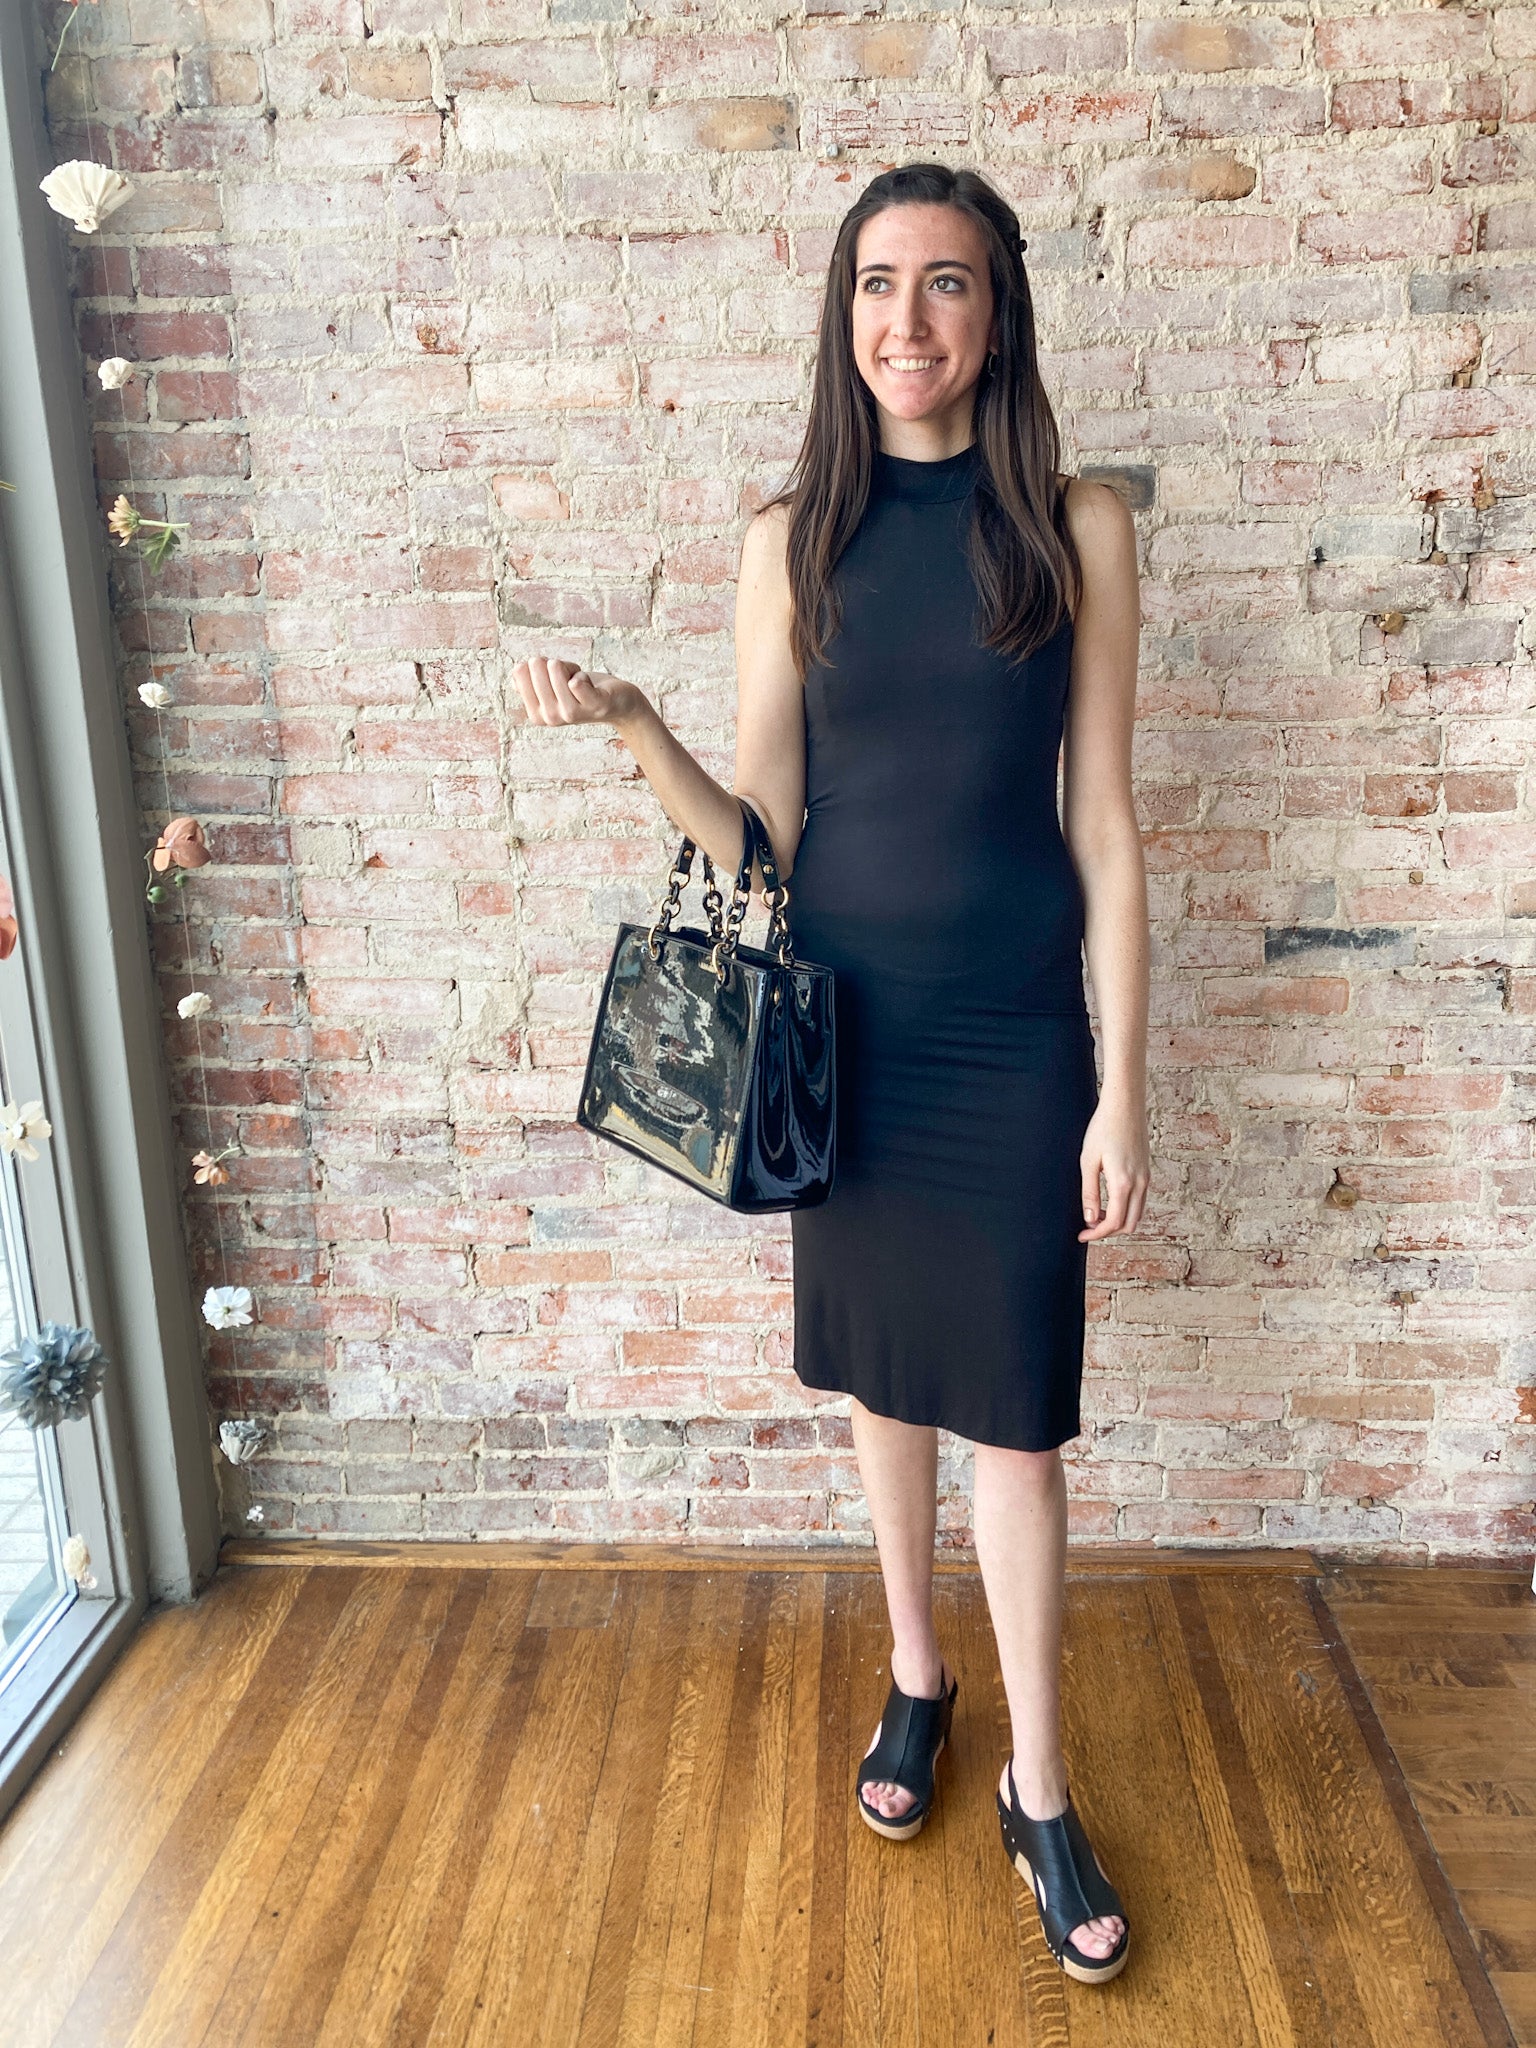 a beautiful woman wearing a tight little black midi dress. She is also wearing black platform shoes and carrying a black paten leather handbag. She looks very chic and fabulous. 